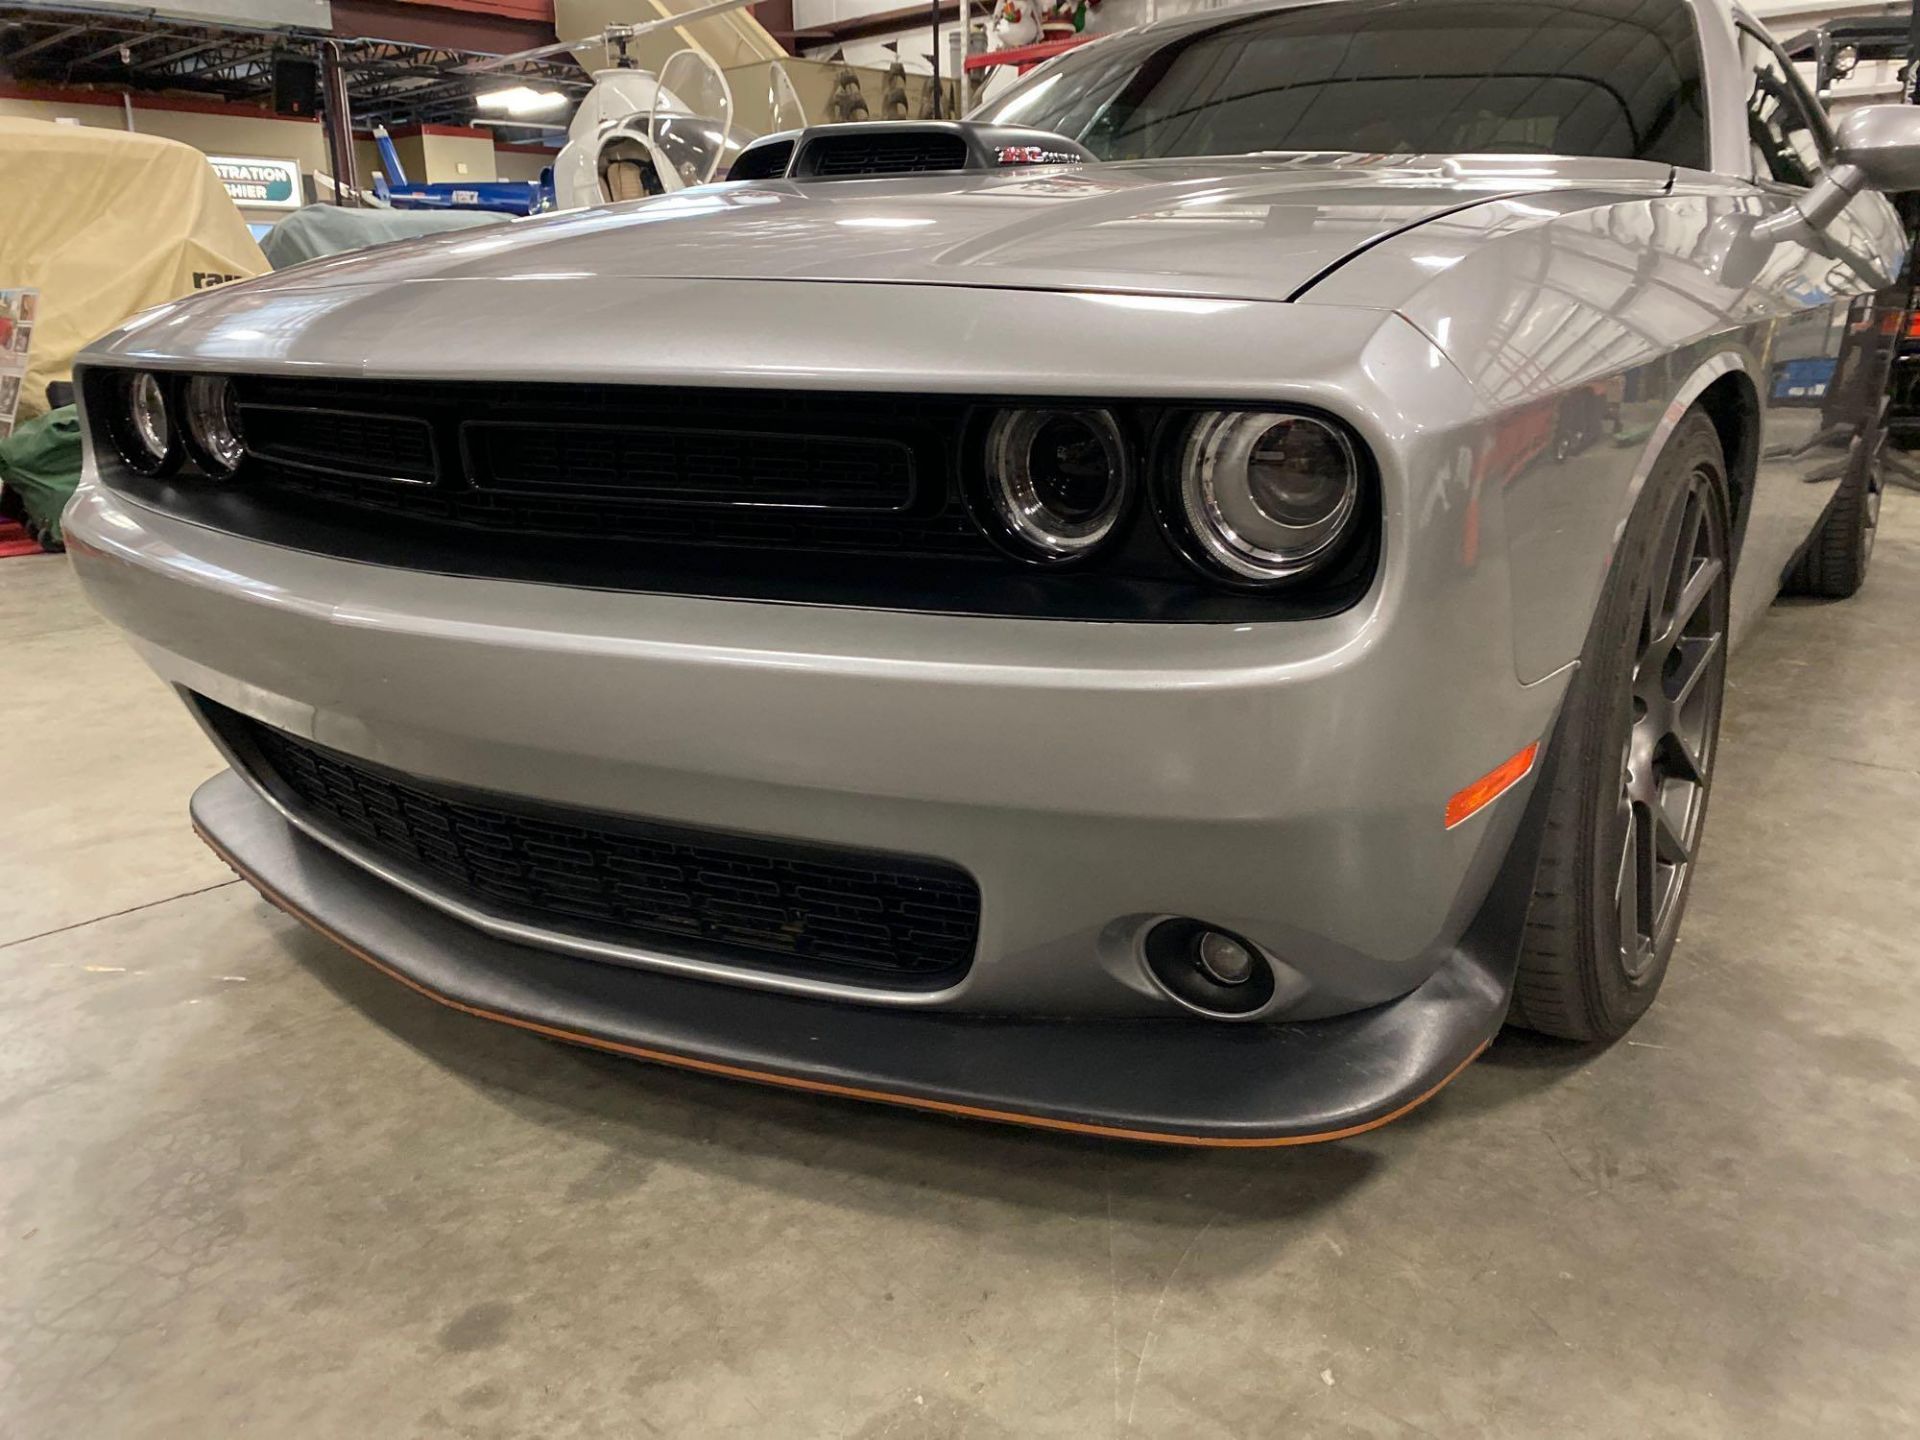 2016 DODGE CHALLENGER WITH SCAT PACK/ SHAKER PACKAGE, APPROX 9,850 MILES SHOWING, RUNS AND OPERATES - Image 4 of 26